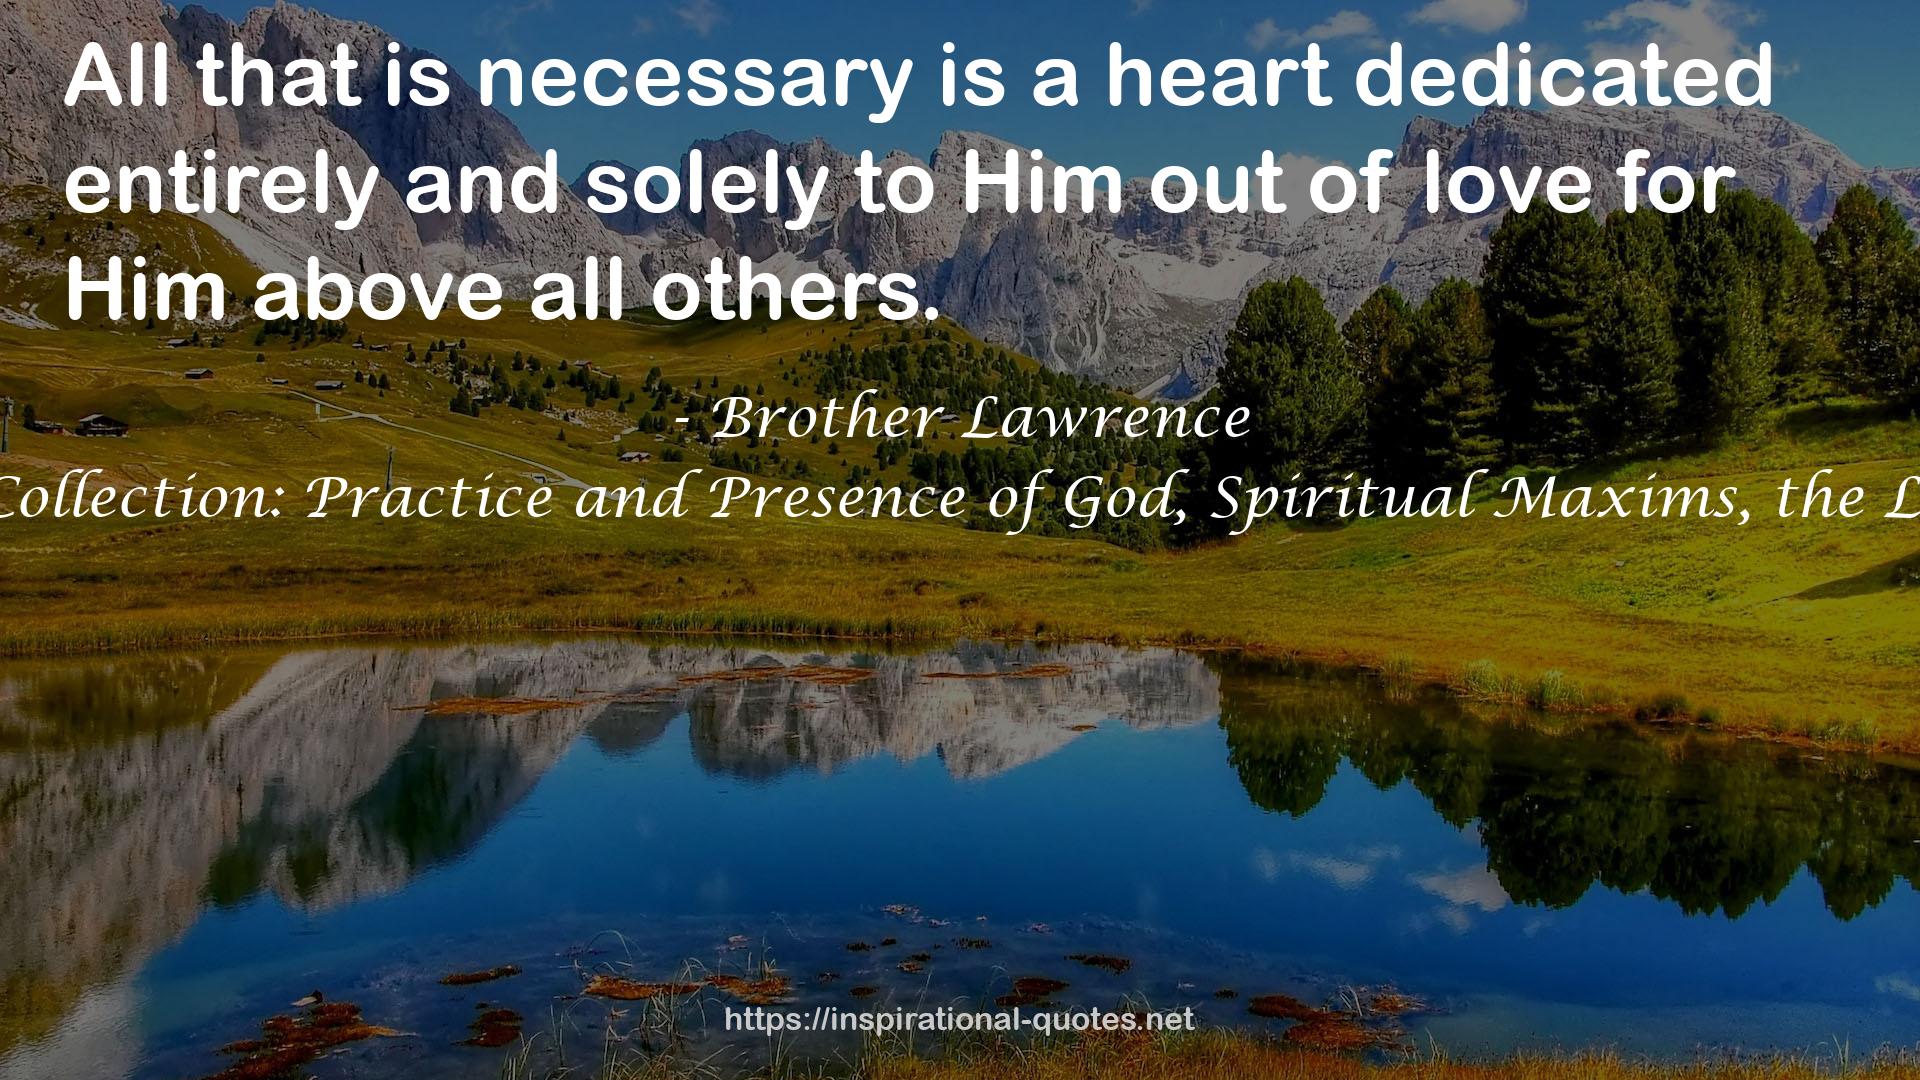 The Brother Lawrence Collection: Practice and Presence of God, Spiritual Maxims, the Life of Brother Lawrence QUOTES